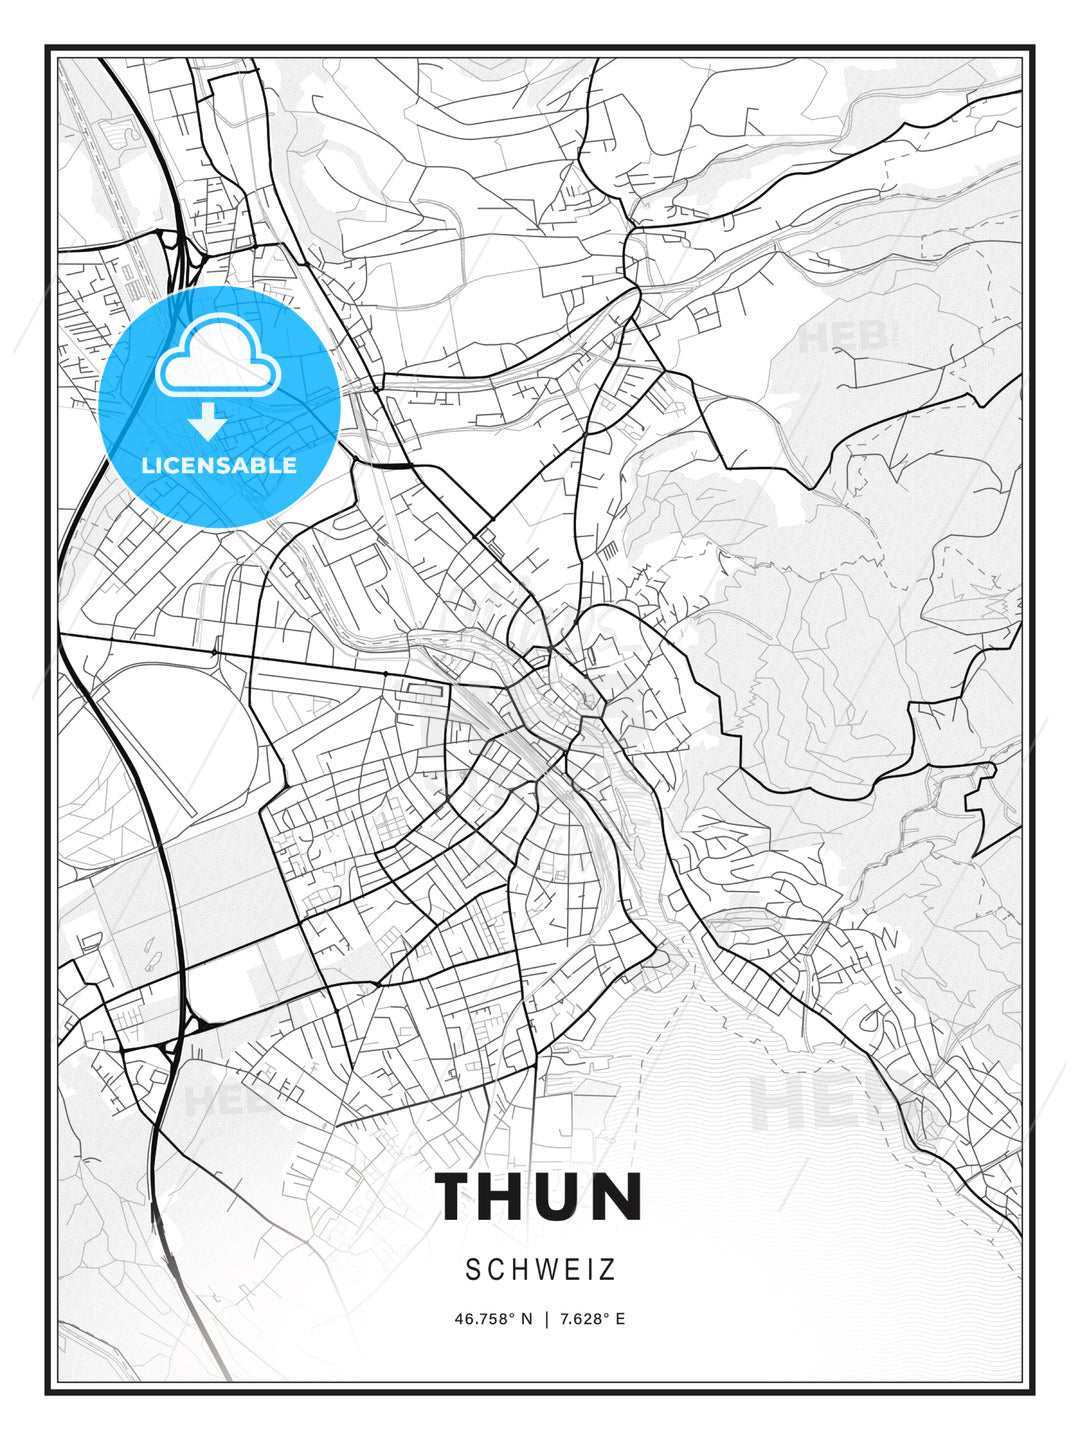 Thun, Switzerland, Modern Print Template in Various Formats - HEBSTREITS Sketches